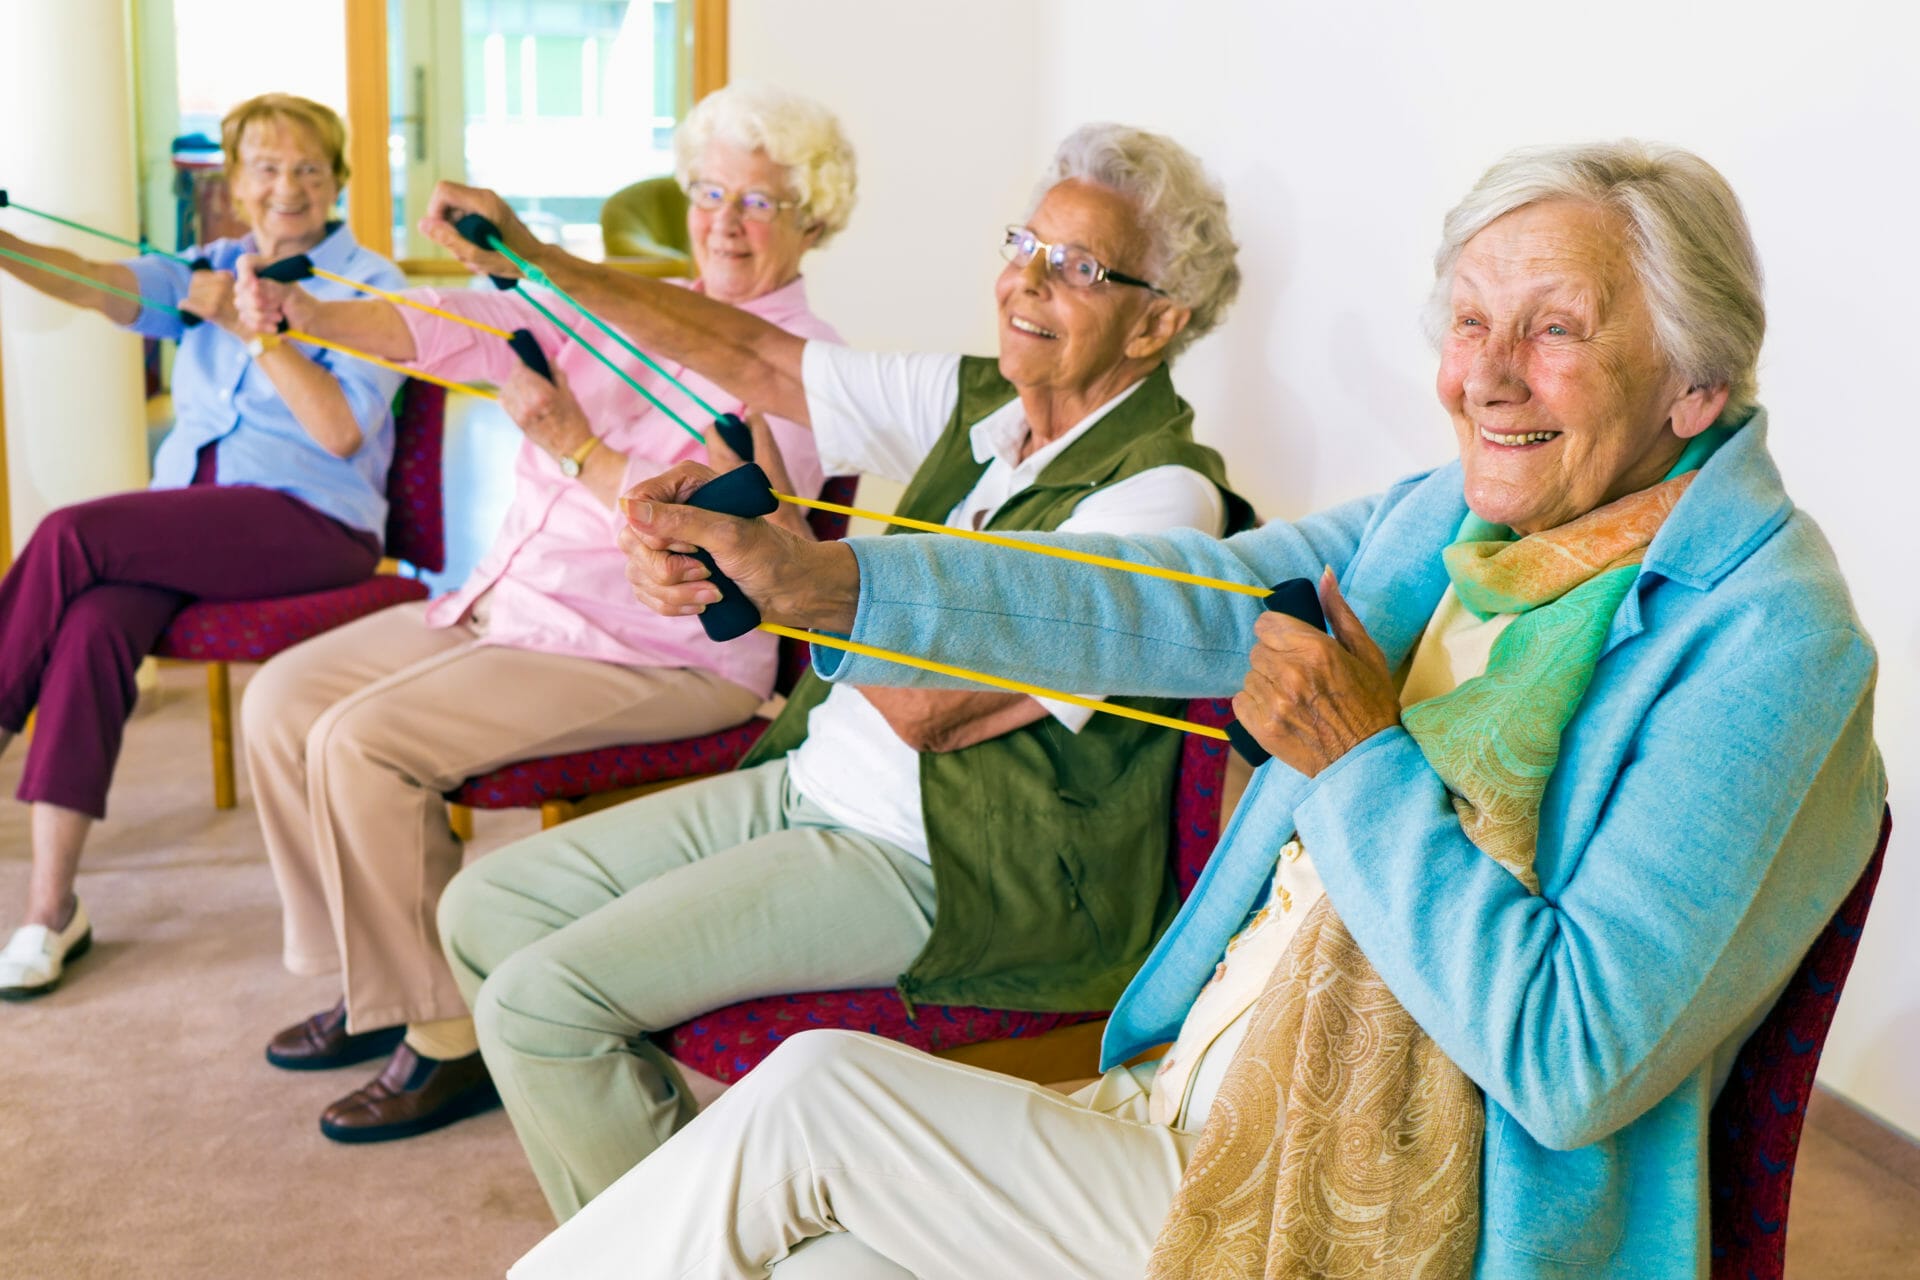 Group of four smiling senior women toning their arms with elastic strengthening bands while seated in fitness class.